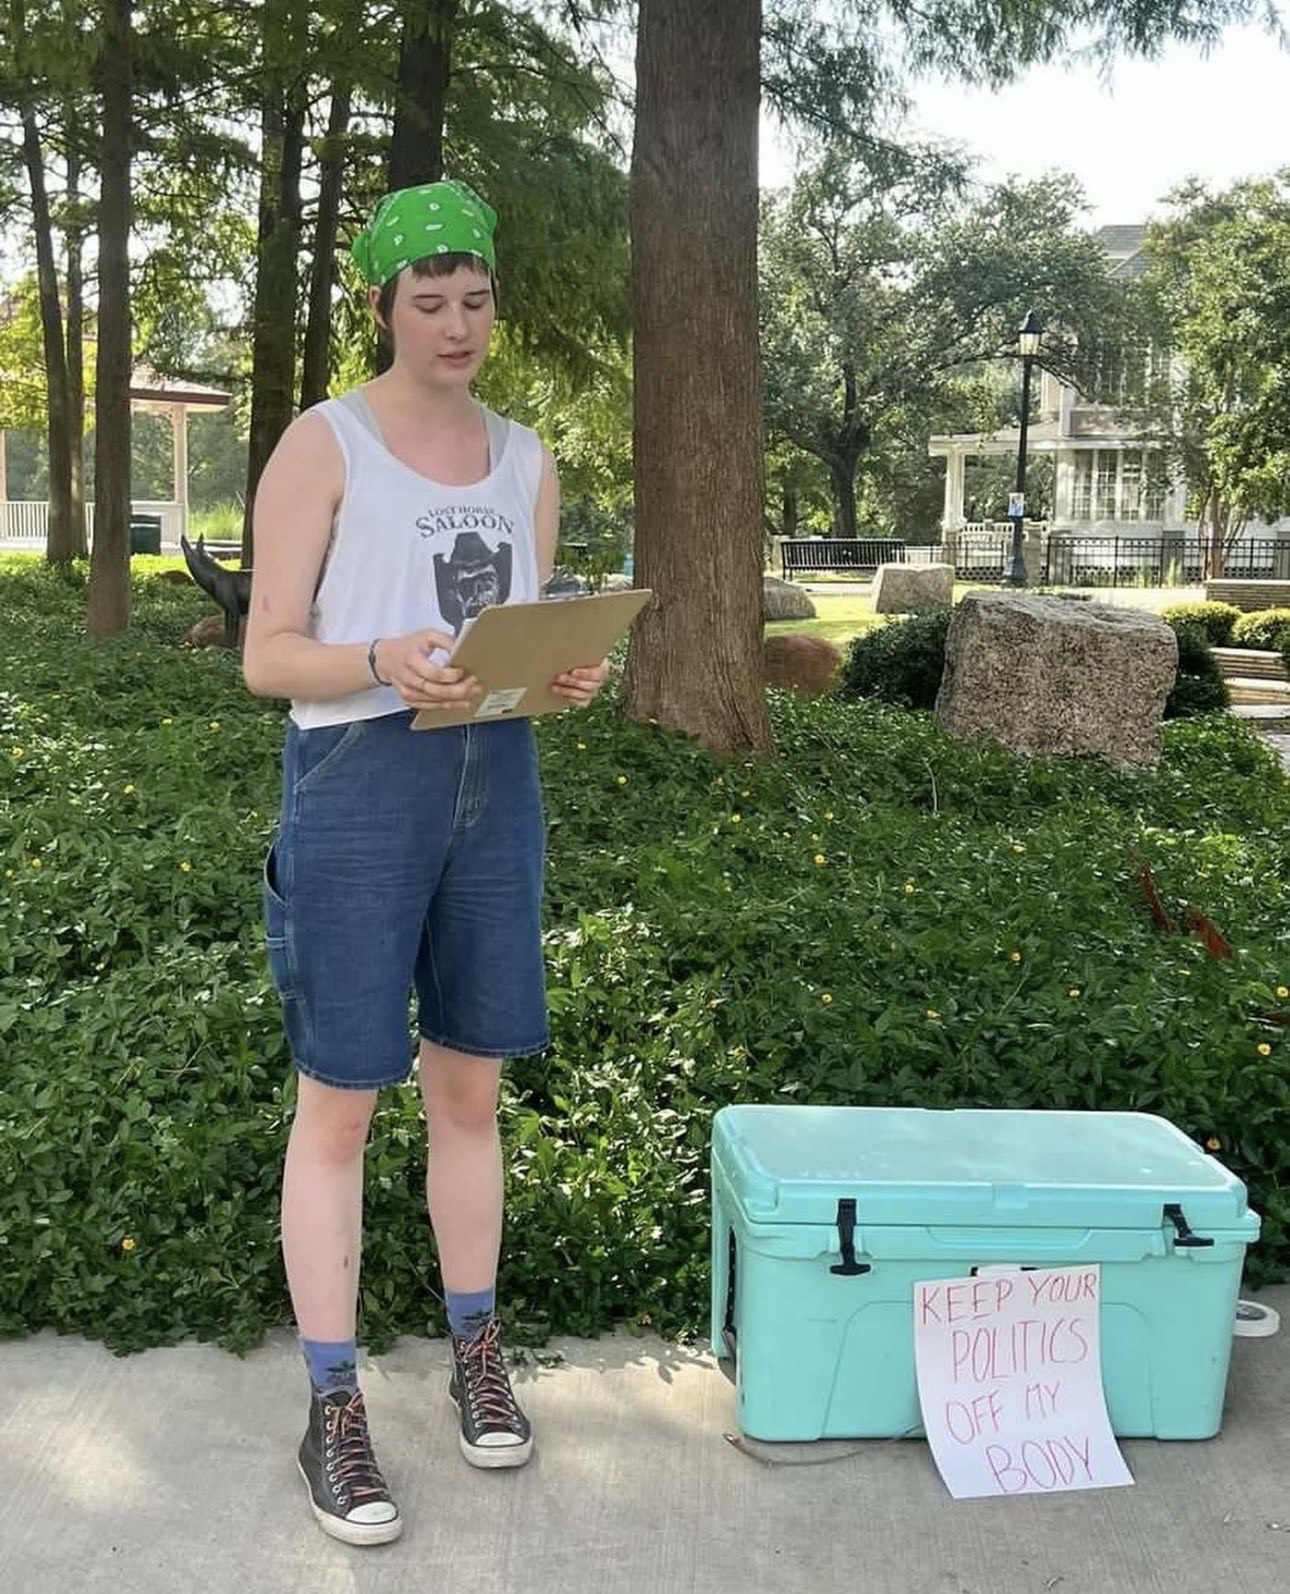 Louise Culbertson, a white teenage woman is holding a clipboard, standing next to a blue cooler with a sign on it reading "Keep your politics off my body."